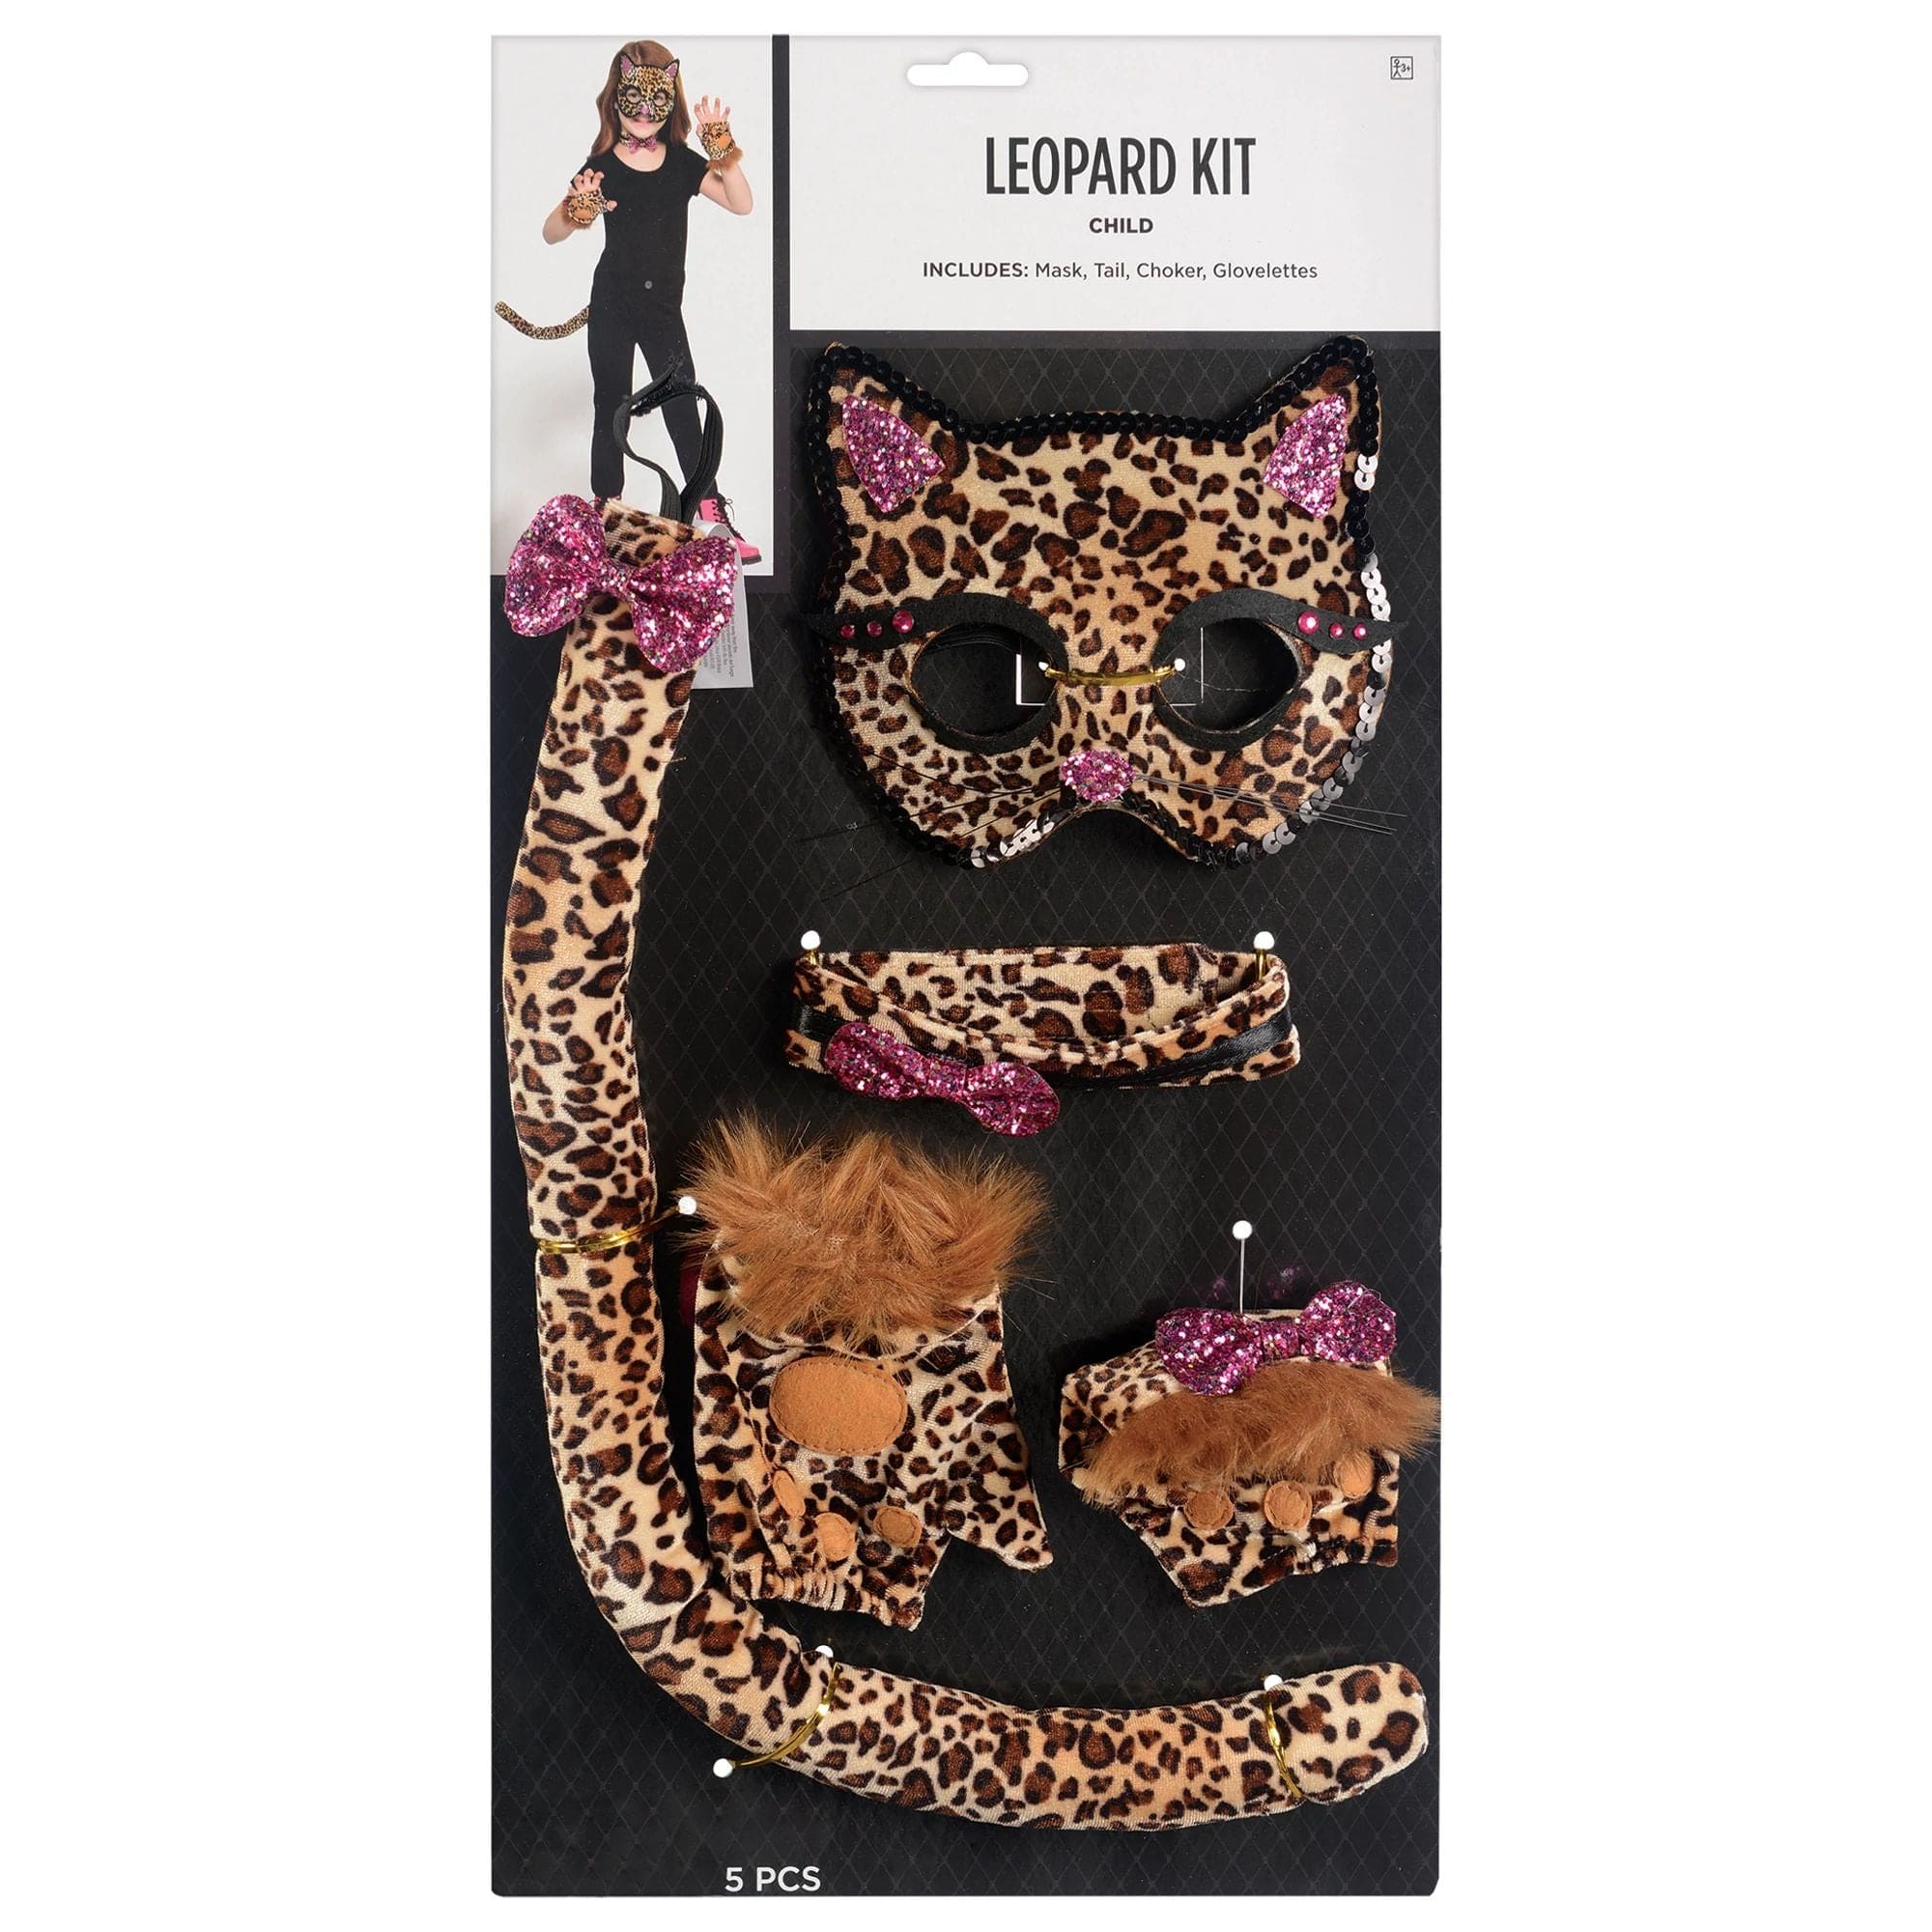 Amscan COSTUMES Spotted Leopard Kit - Child